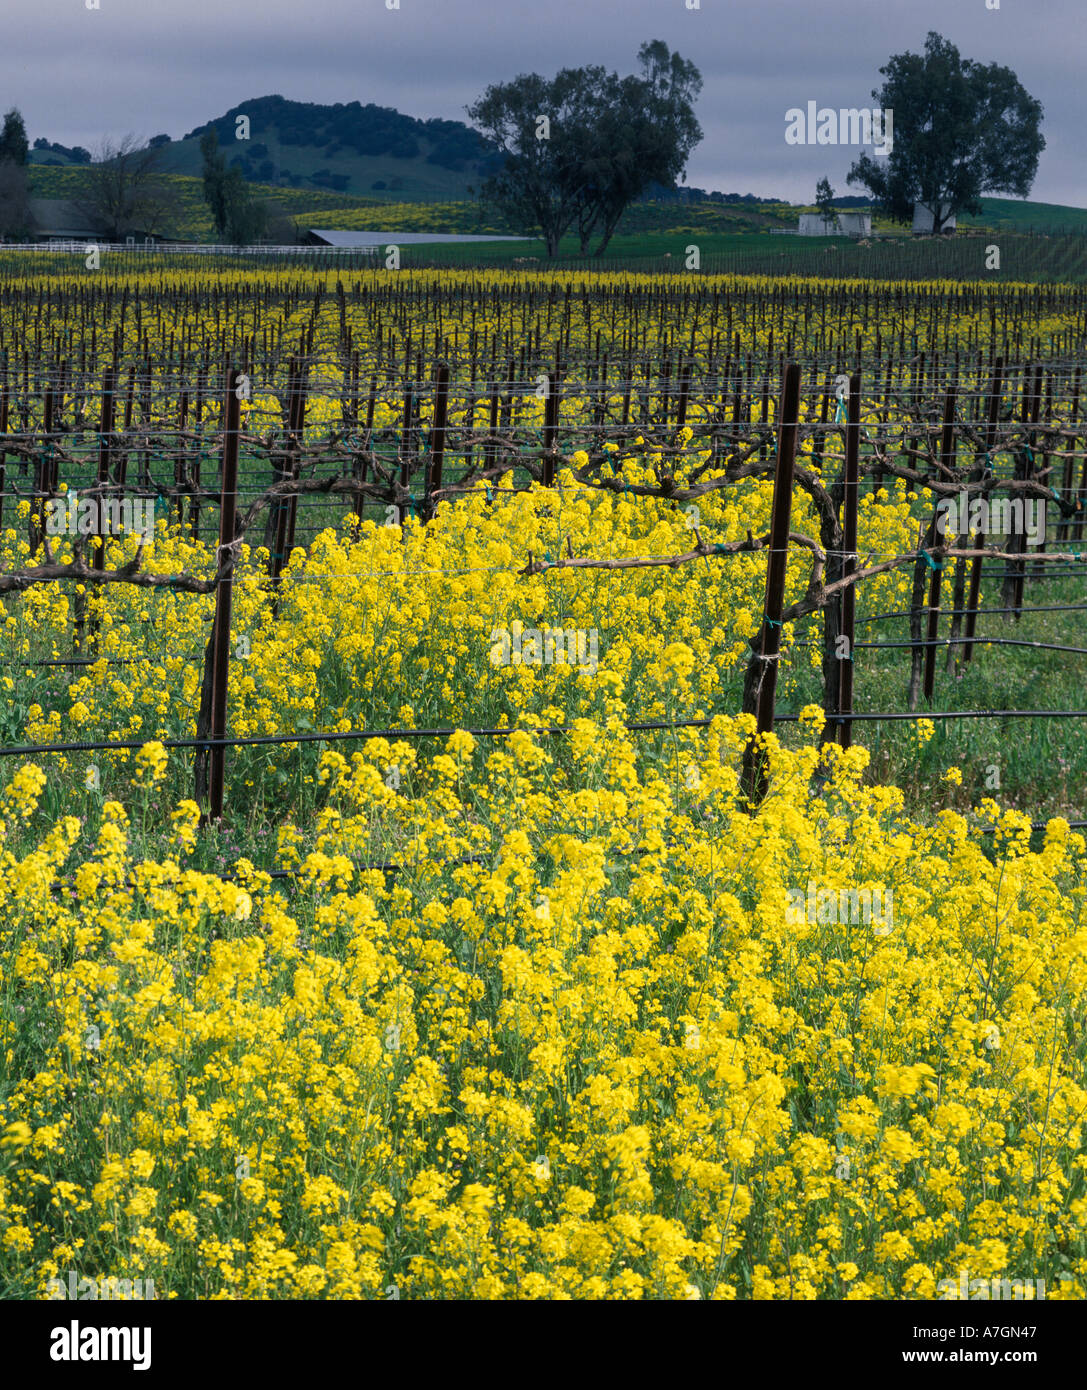 USA, California, Napa Valley, Los Carneros Ava.St. Clair vineyards in spring, growing Pinot Noir for Acacia Winery. Stock Photo